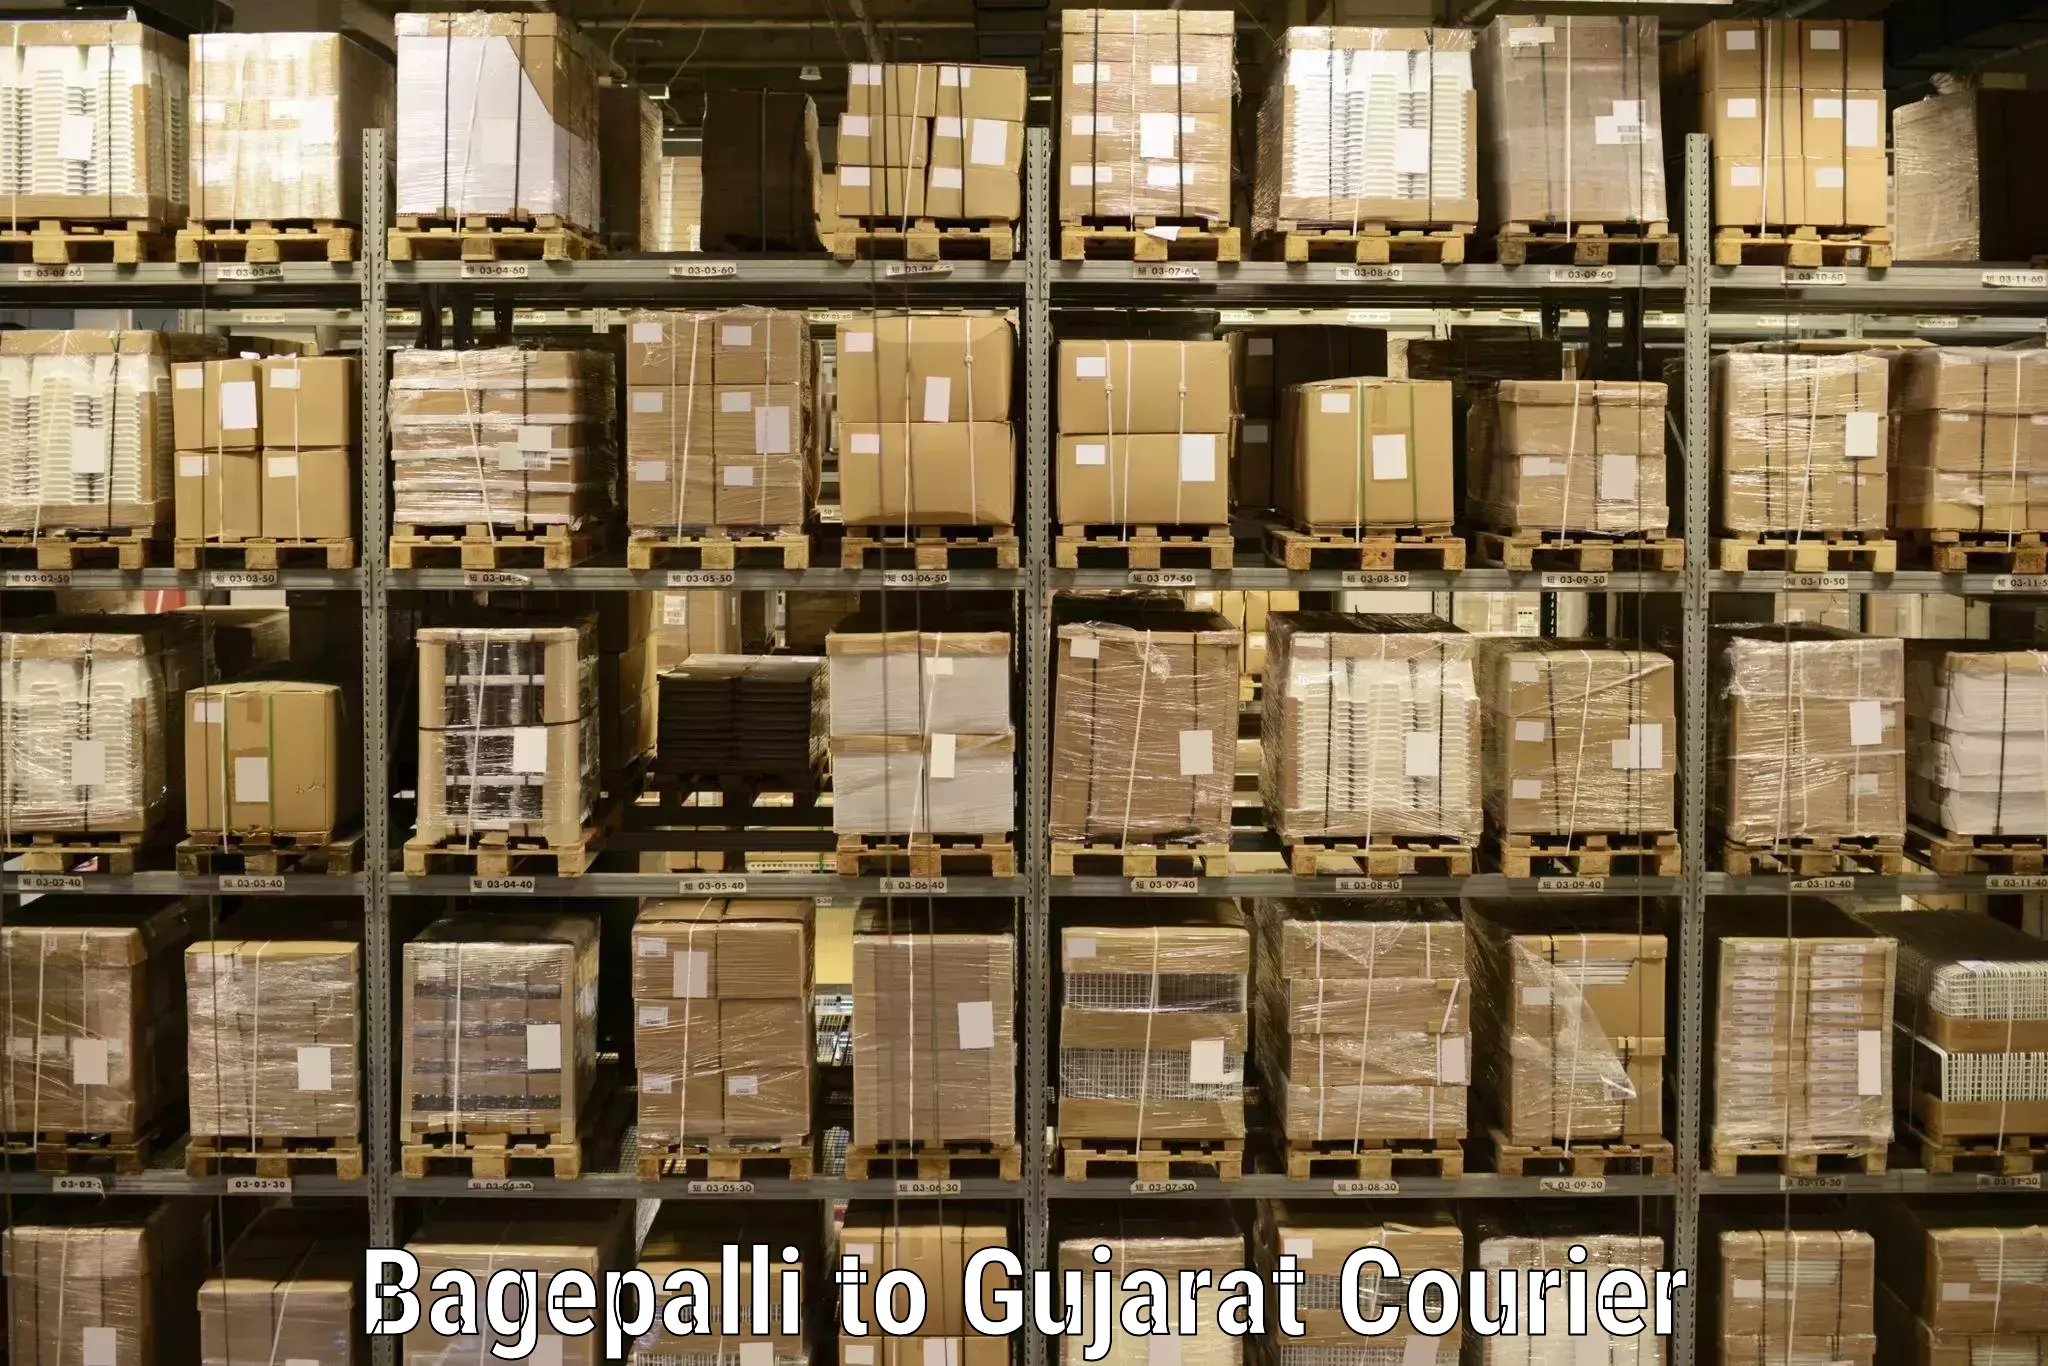 On-call courier service Bagepalli to Porbandar